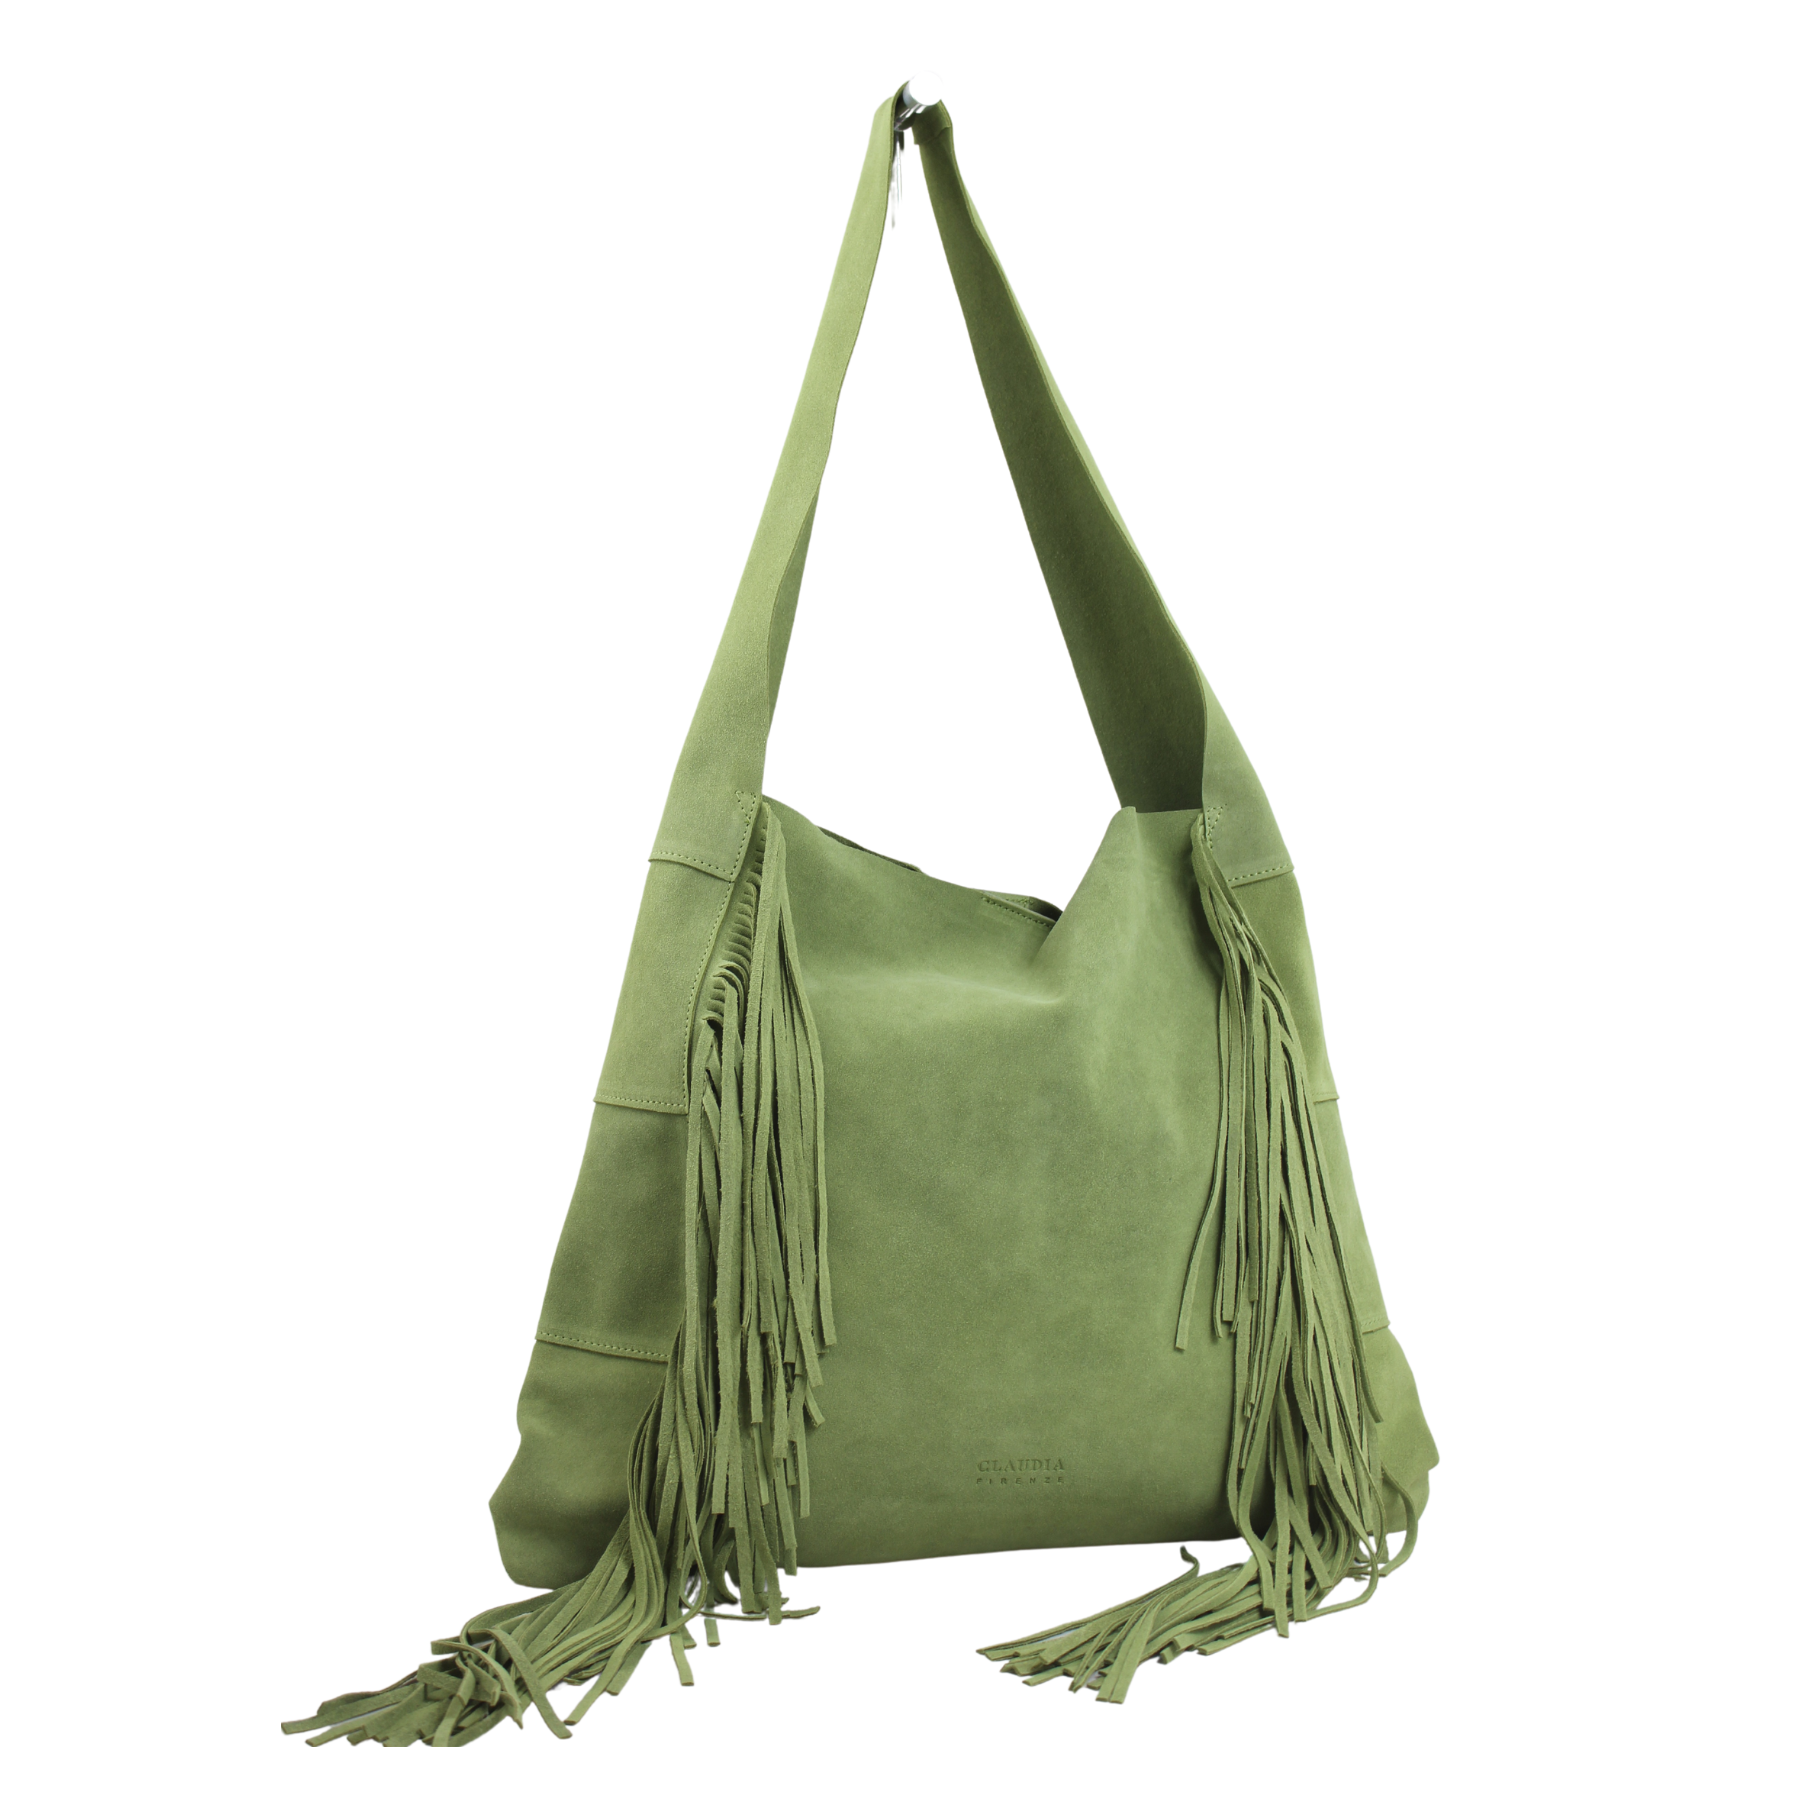 Florence Tote Leather Bag Croco-Embossed Green